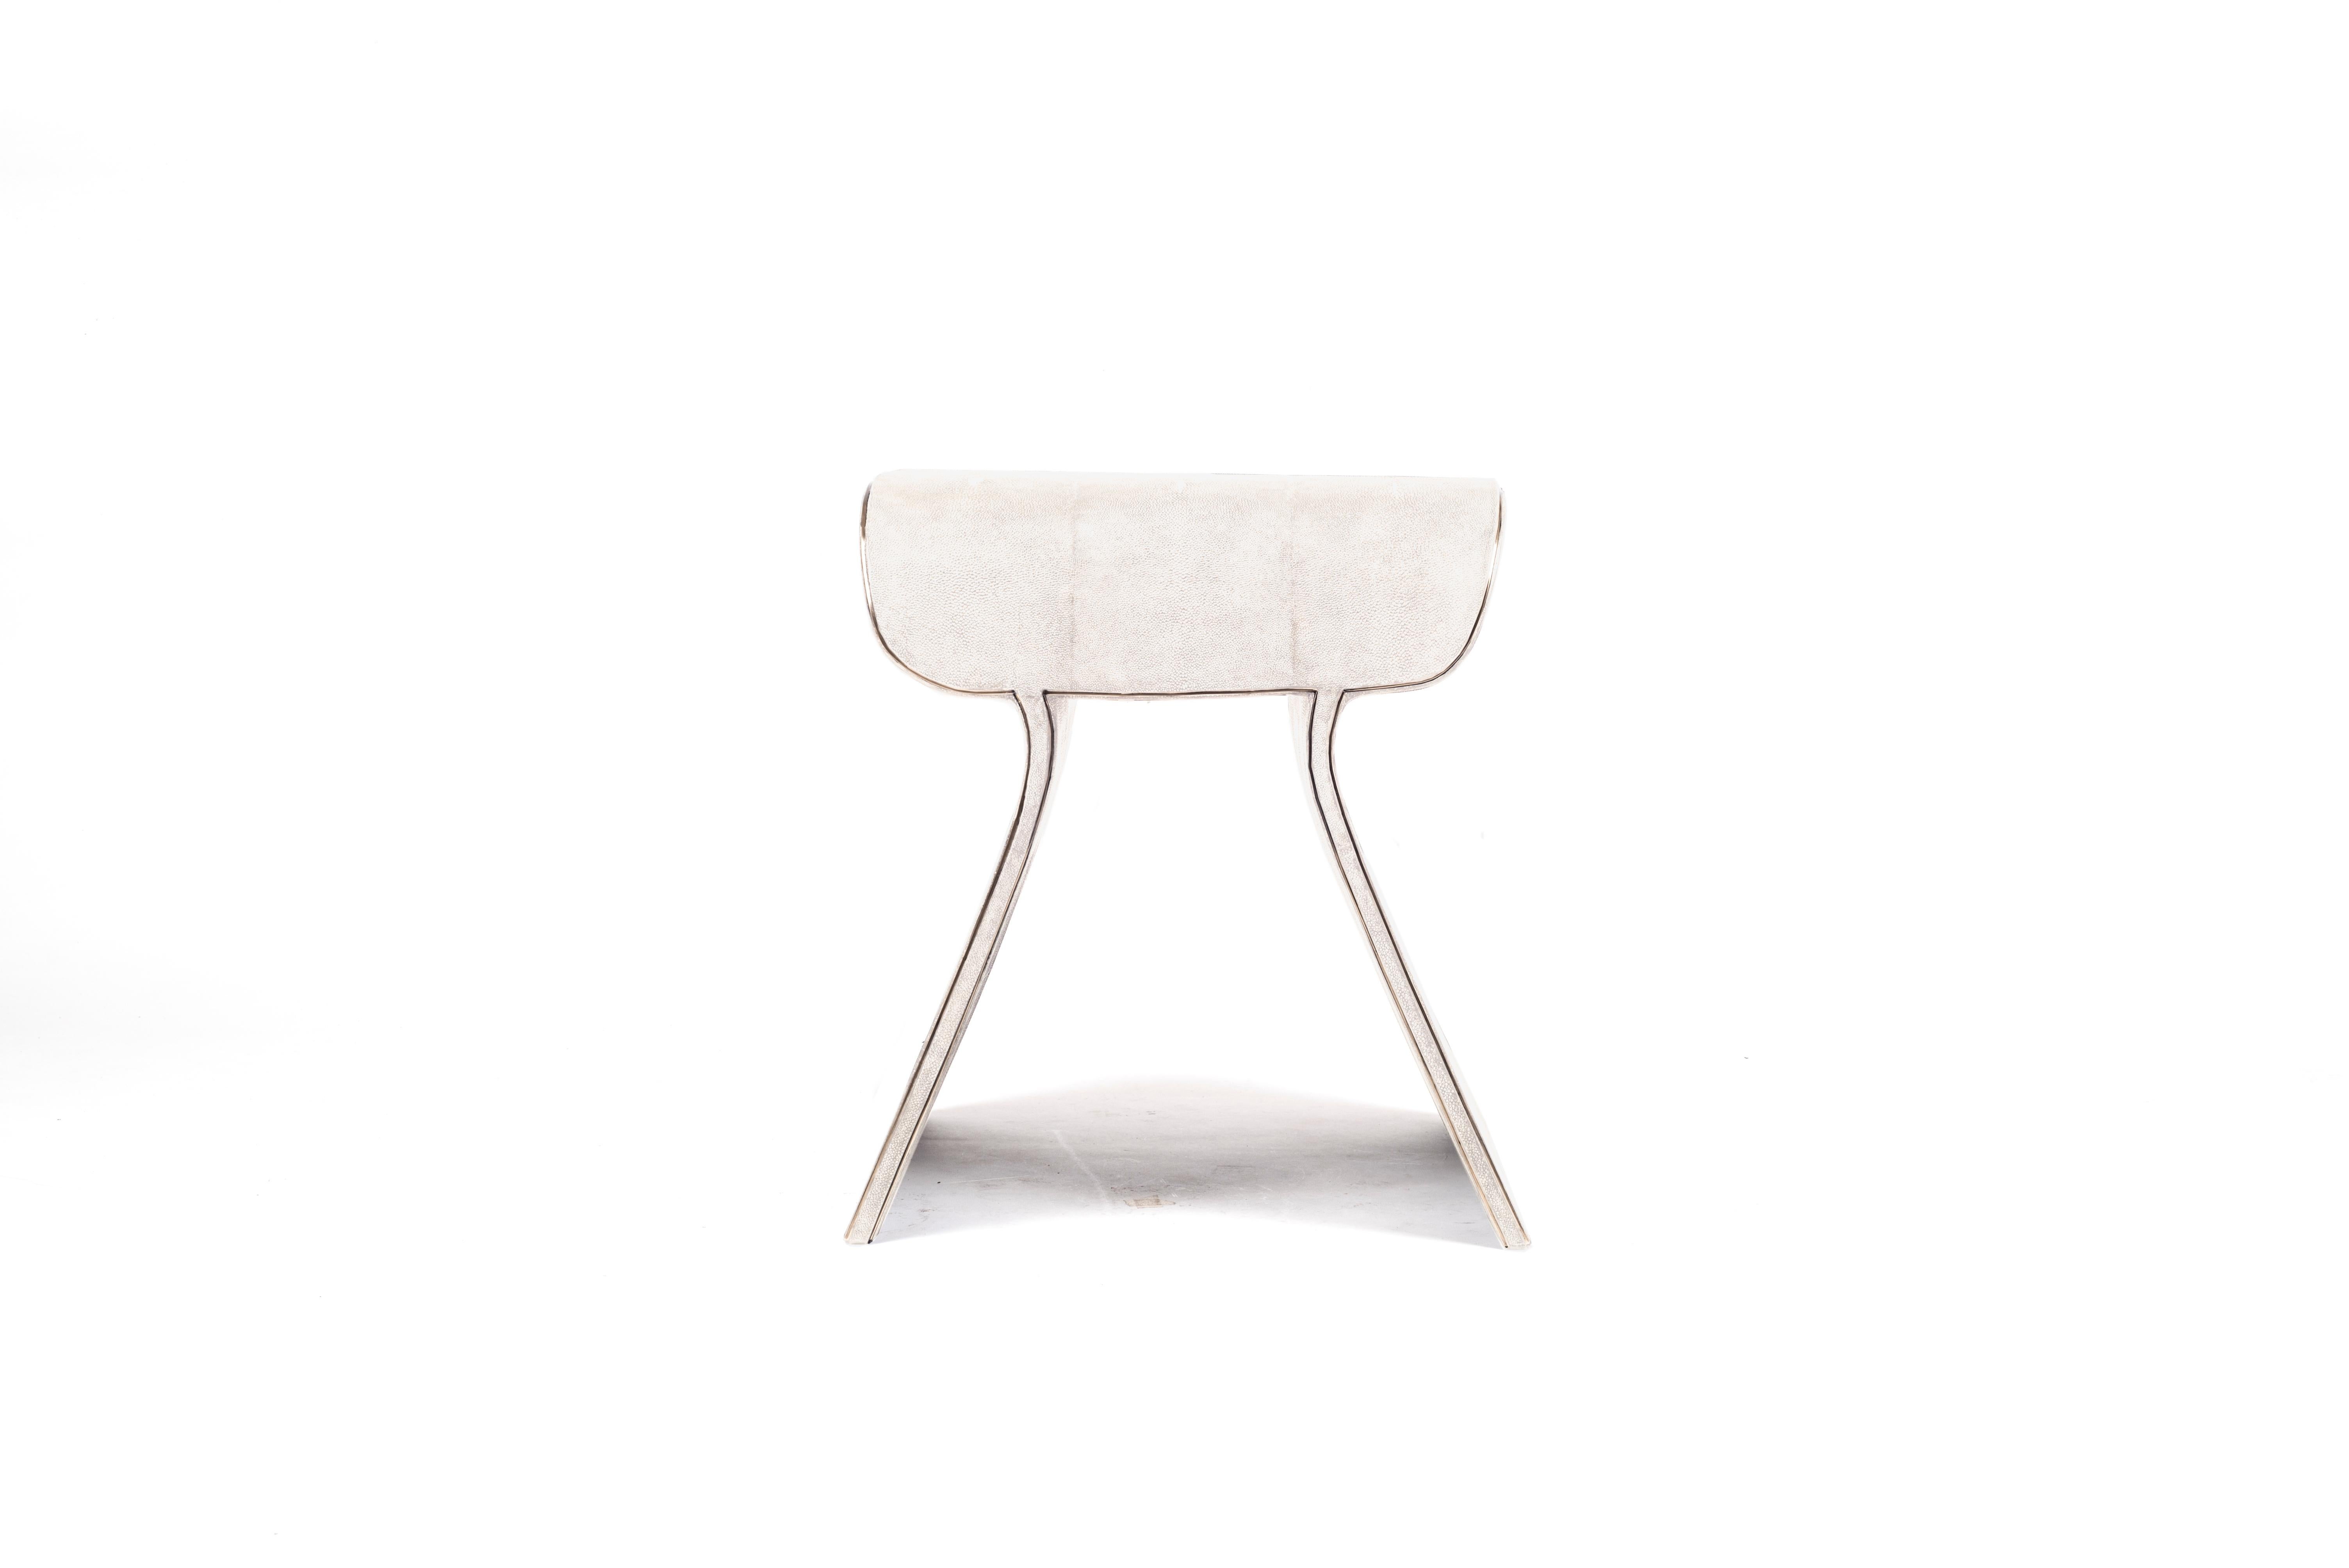 The dandy stool in cream shagreen is a chic seating piece for any space. The clean lines make it an adaptable piece and the discreet bronze-patina brass indentation details add another luxurious element. Available with metal on the side, image at